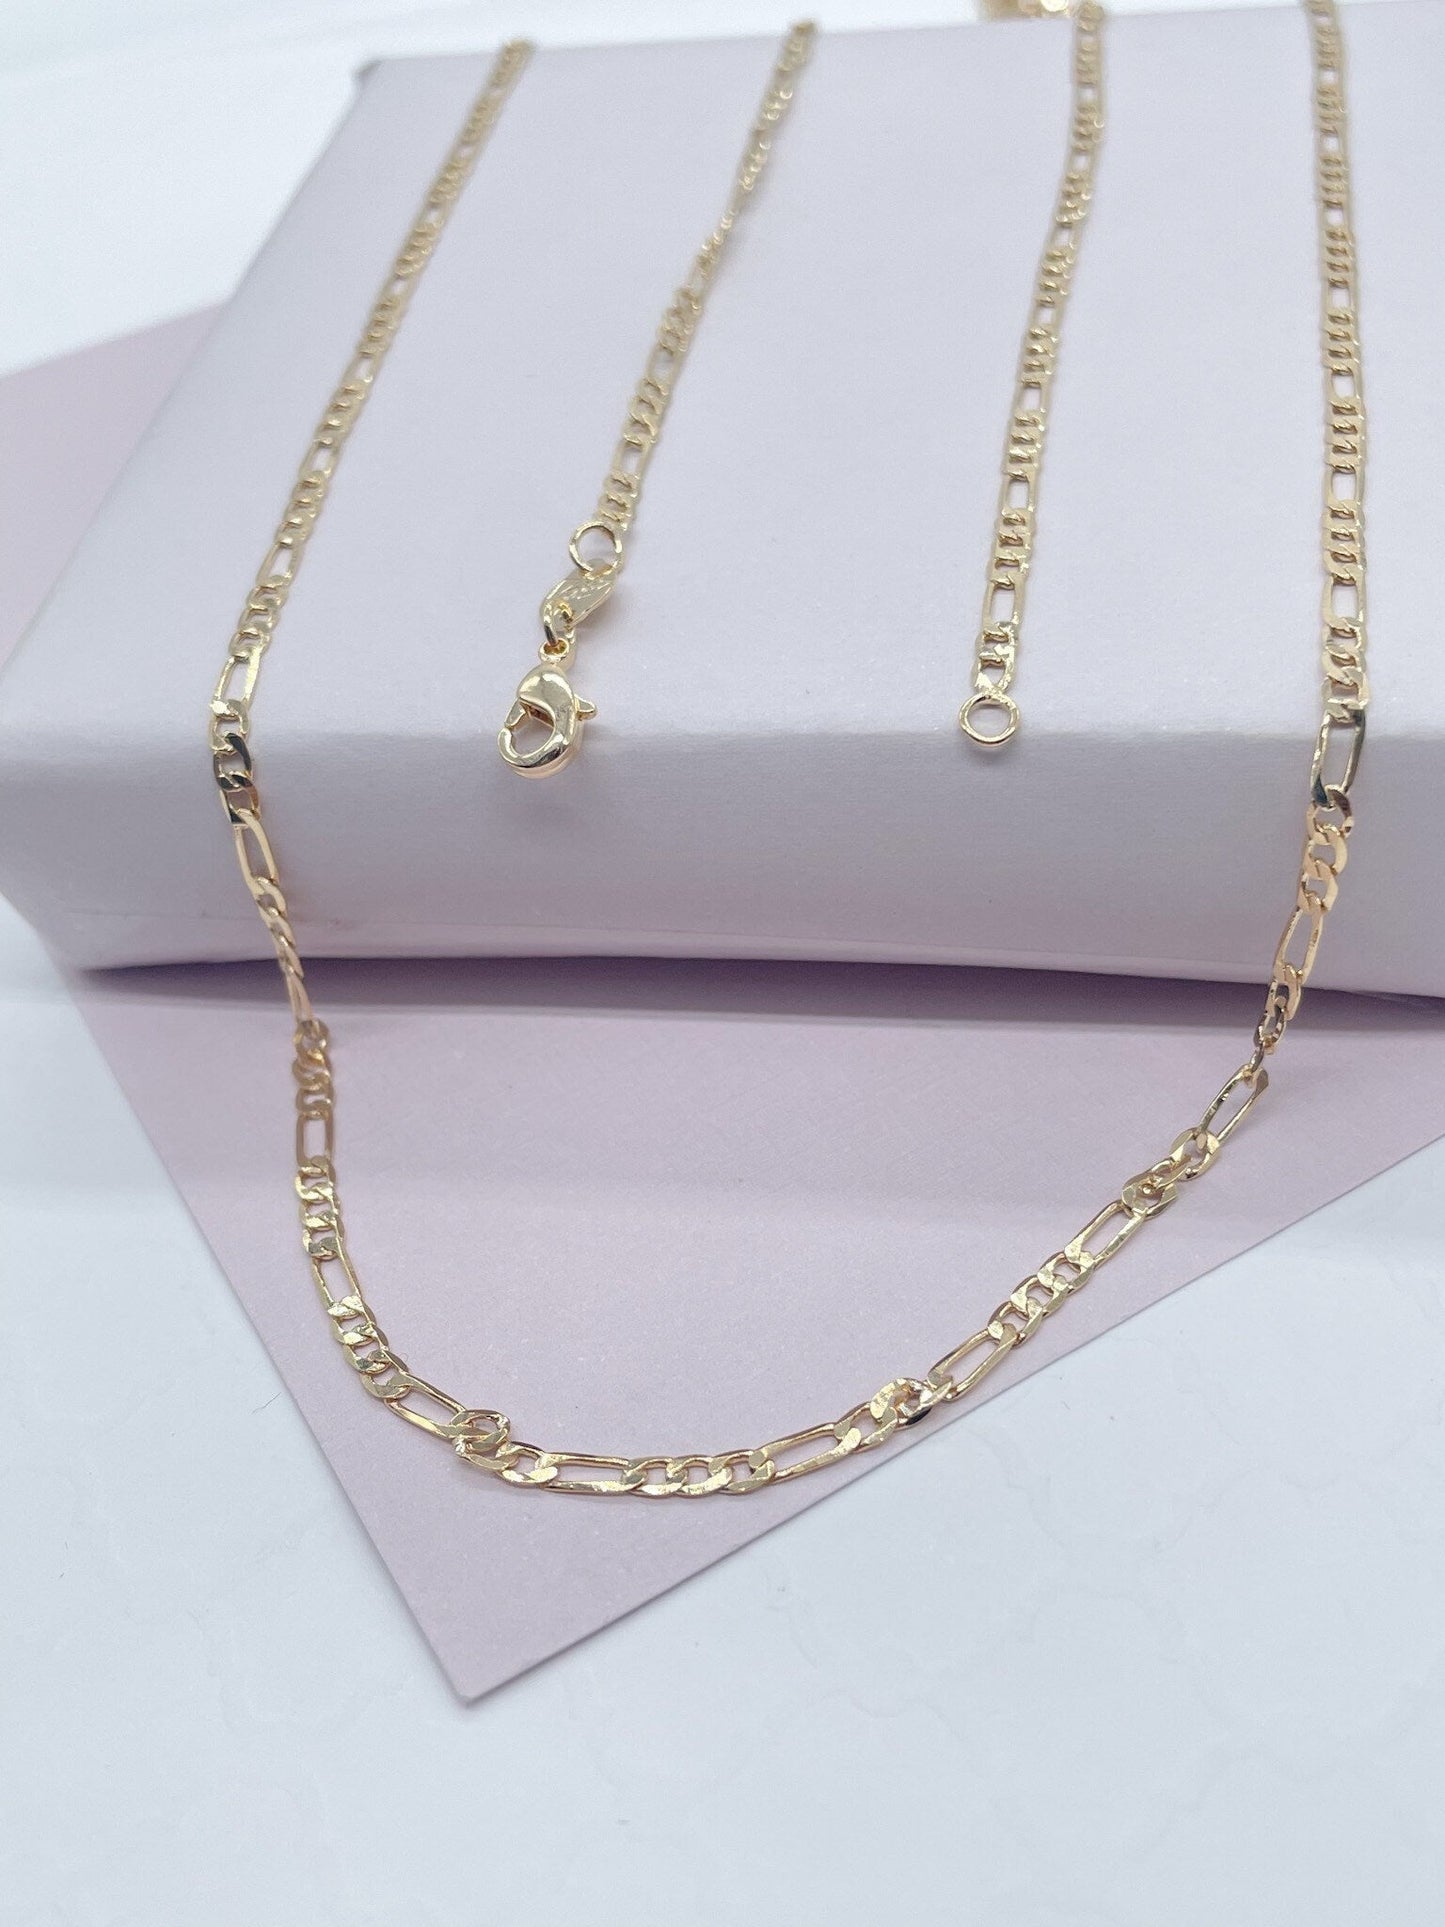 18k Gold Layered 3x1 Figaro 2mm Chain Necklace Wholesale Jewelry Making Supplies